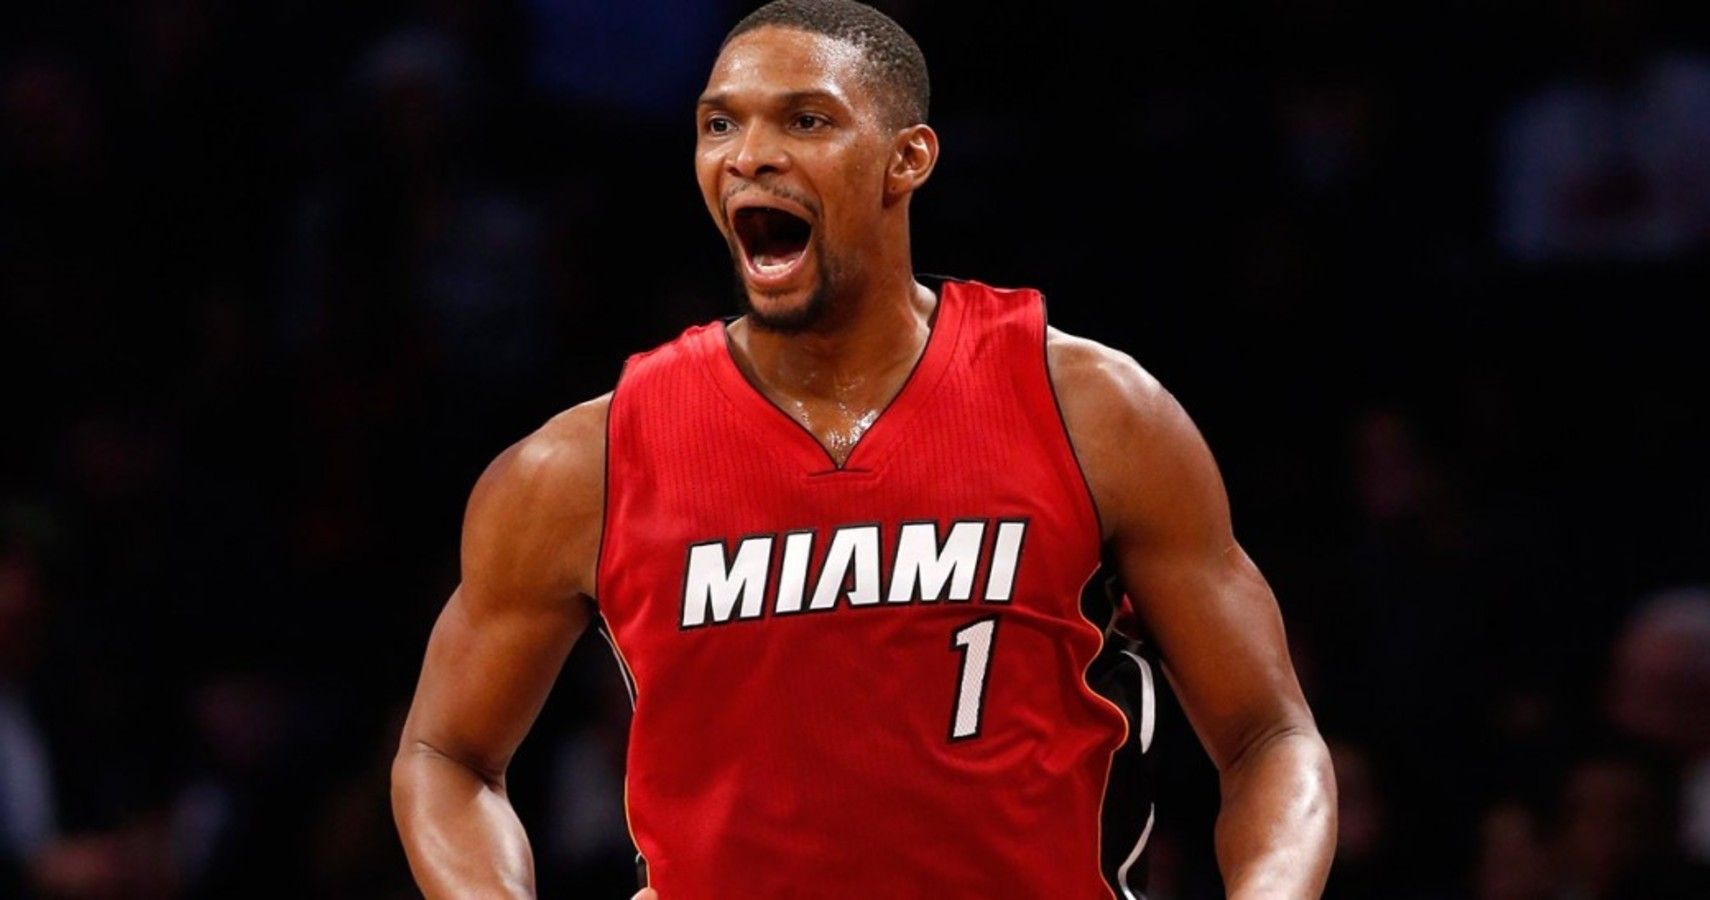 Chris Bosh Still Wants To Play In NBA After 2-Year Absence